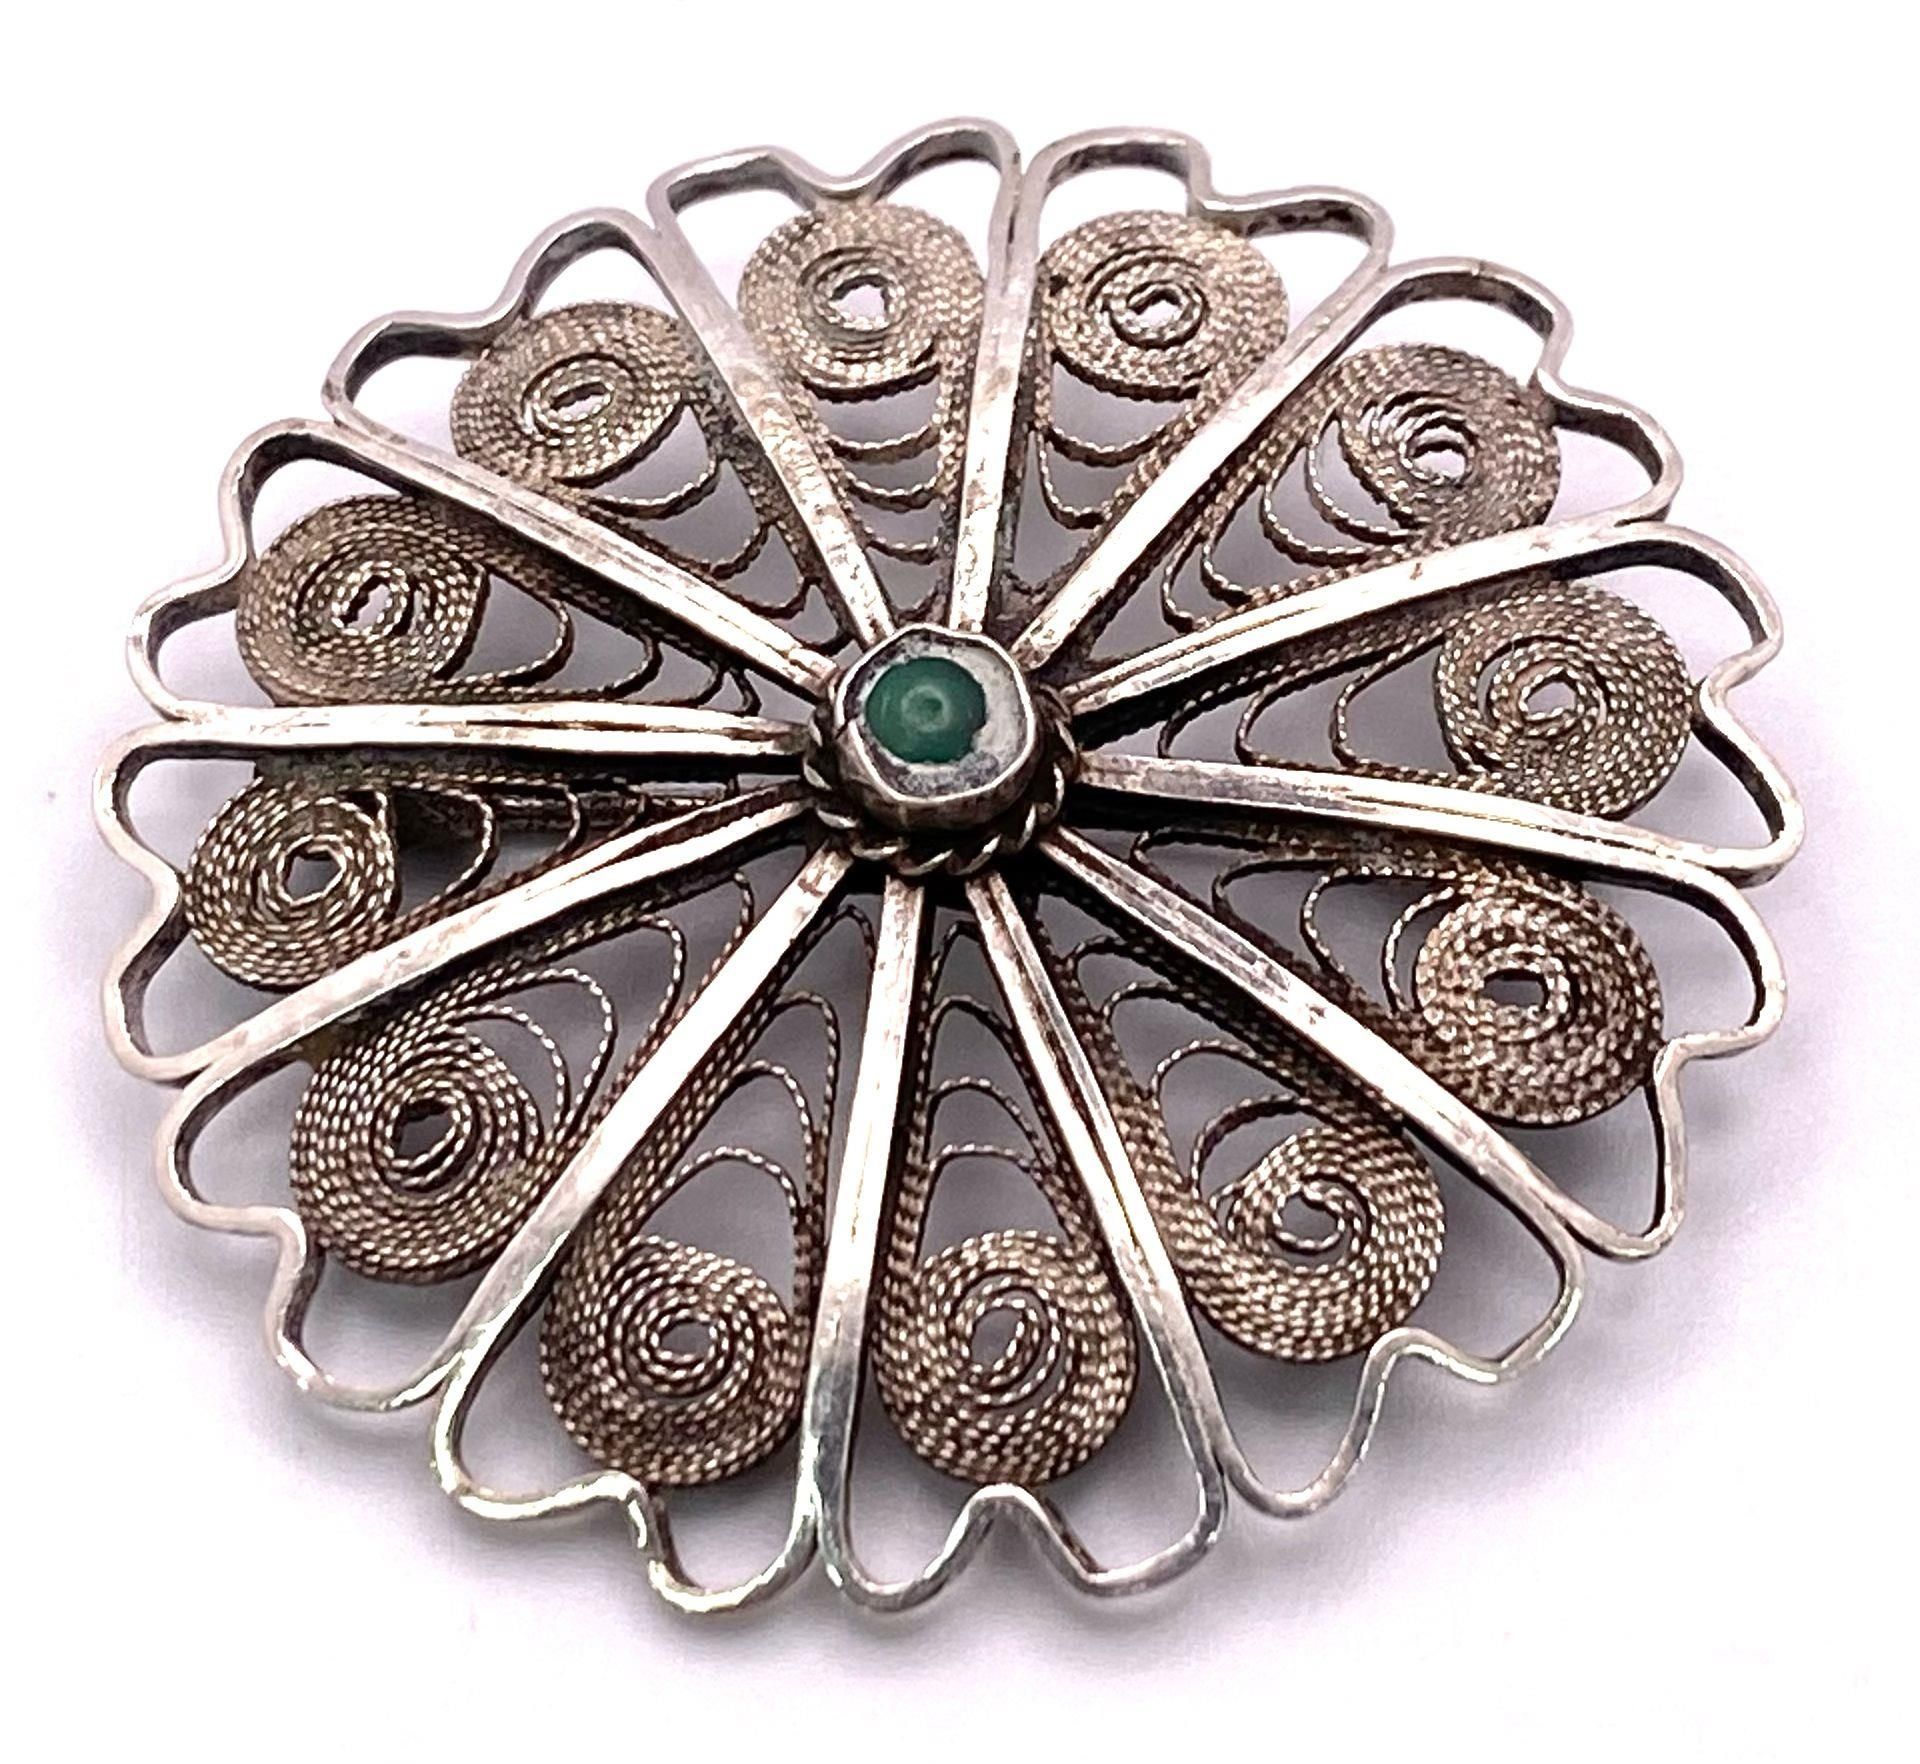 A Rare, Vintage or Antique, Israeli Silver Filigree Turquoise Set Brooch. 3.8cm Wide. Weight 6